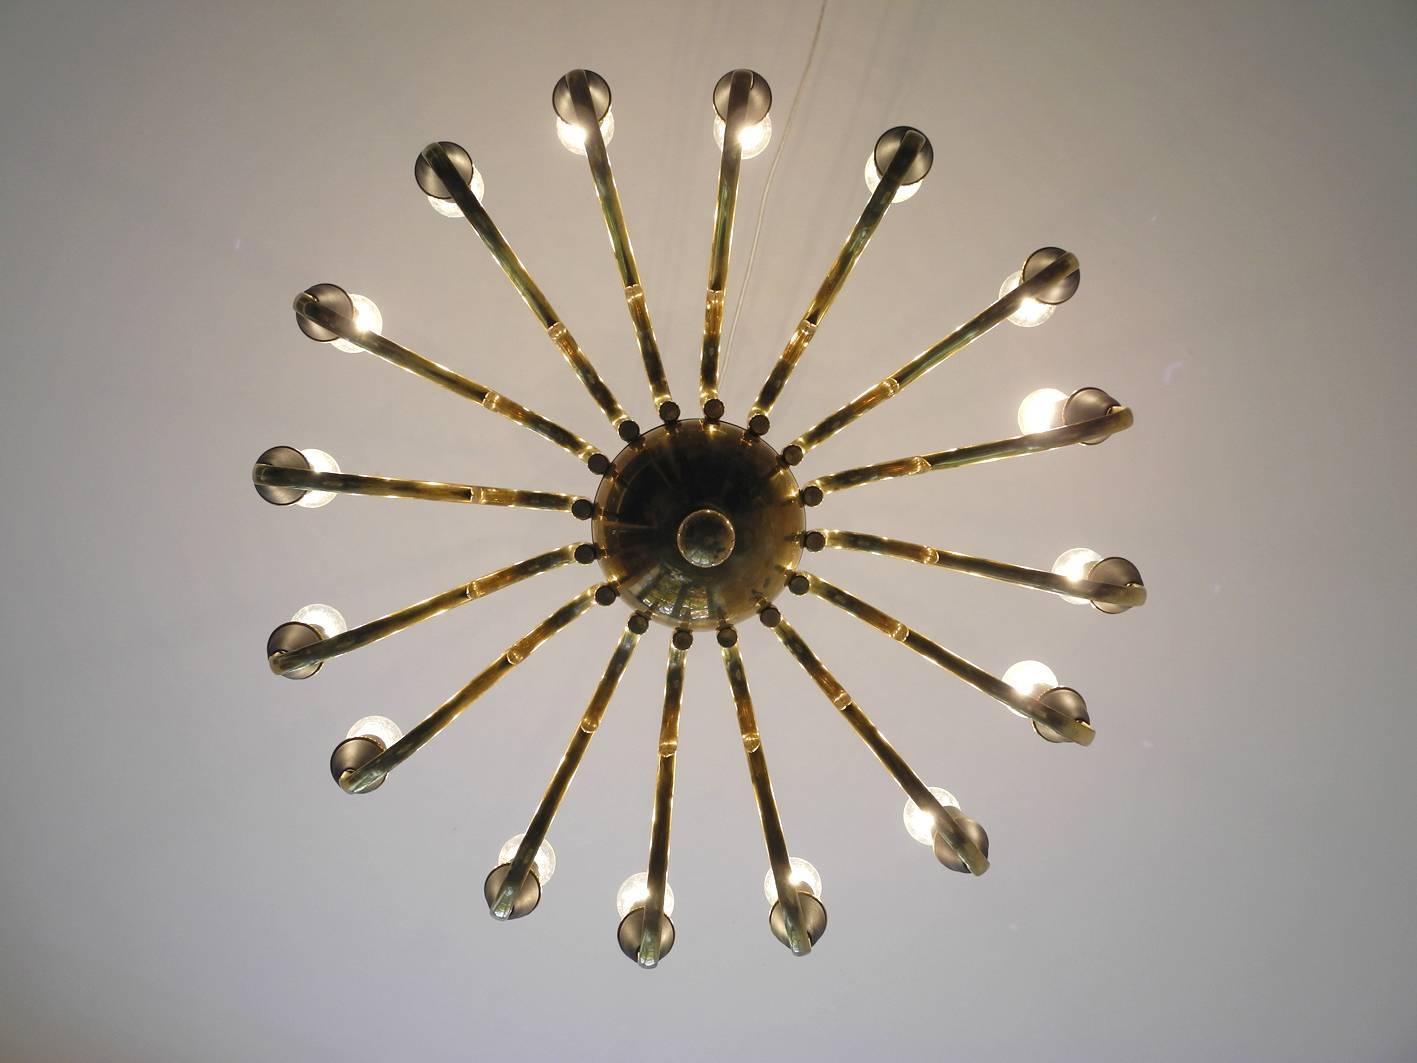 Italian Mid-Century Modern Brass Chandelier with 16 Sockets, Made in Italy For Sale